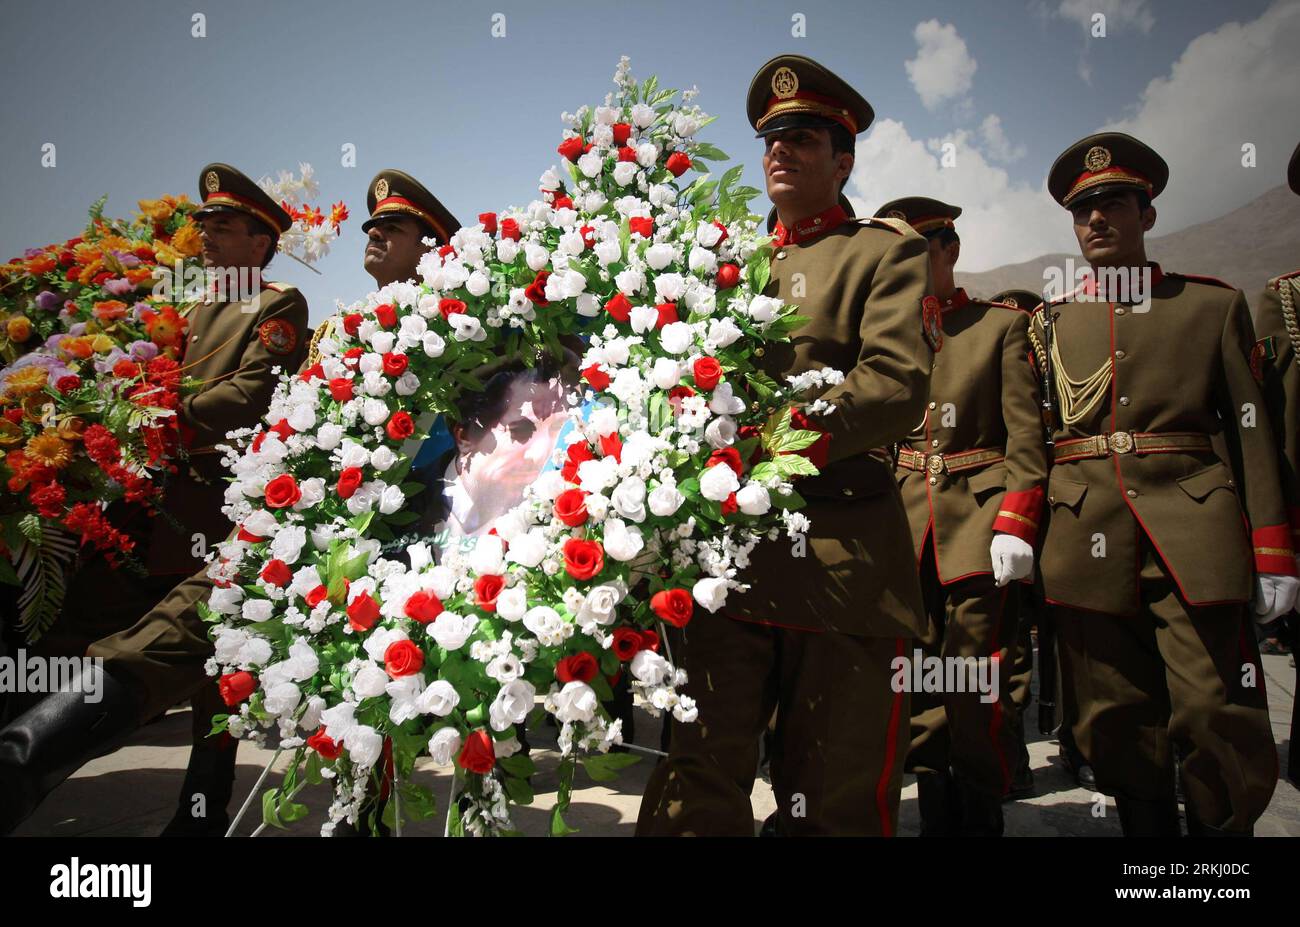 Bildnummer: 55935379  Datum: 10.09.2011  Copyright: imago/Xinhua (110910) -- PANJSHIR, Sept. 10, 2011 (Xinhua) -- Afghan honor guards carry a wreath during the ceremony marking the 10th anniversary of the death of Ahmad Shah Massoud in Panjshir Province, Afghanistan, Sept. 10, 2011. Anti-Taliban leader and commander of Northern Alliance Ahmad Shah Massoud was assassinated in a suicide attack by some Arabs pretending to be journalists on September 9, 2001, and two days later the September 11 attacks on the United States happened. (Xinhua/Ahmad Massoud)(wjd) AFGHANISTAN-AHMAD SHAH MASSOUD-DEATH- Stock Photo